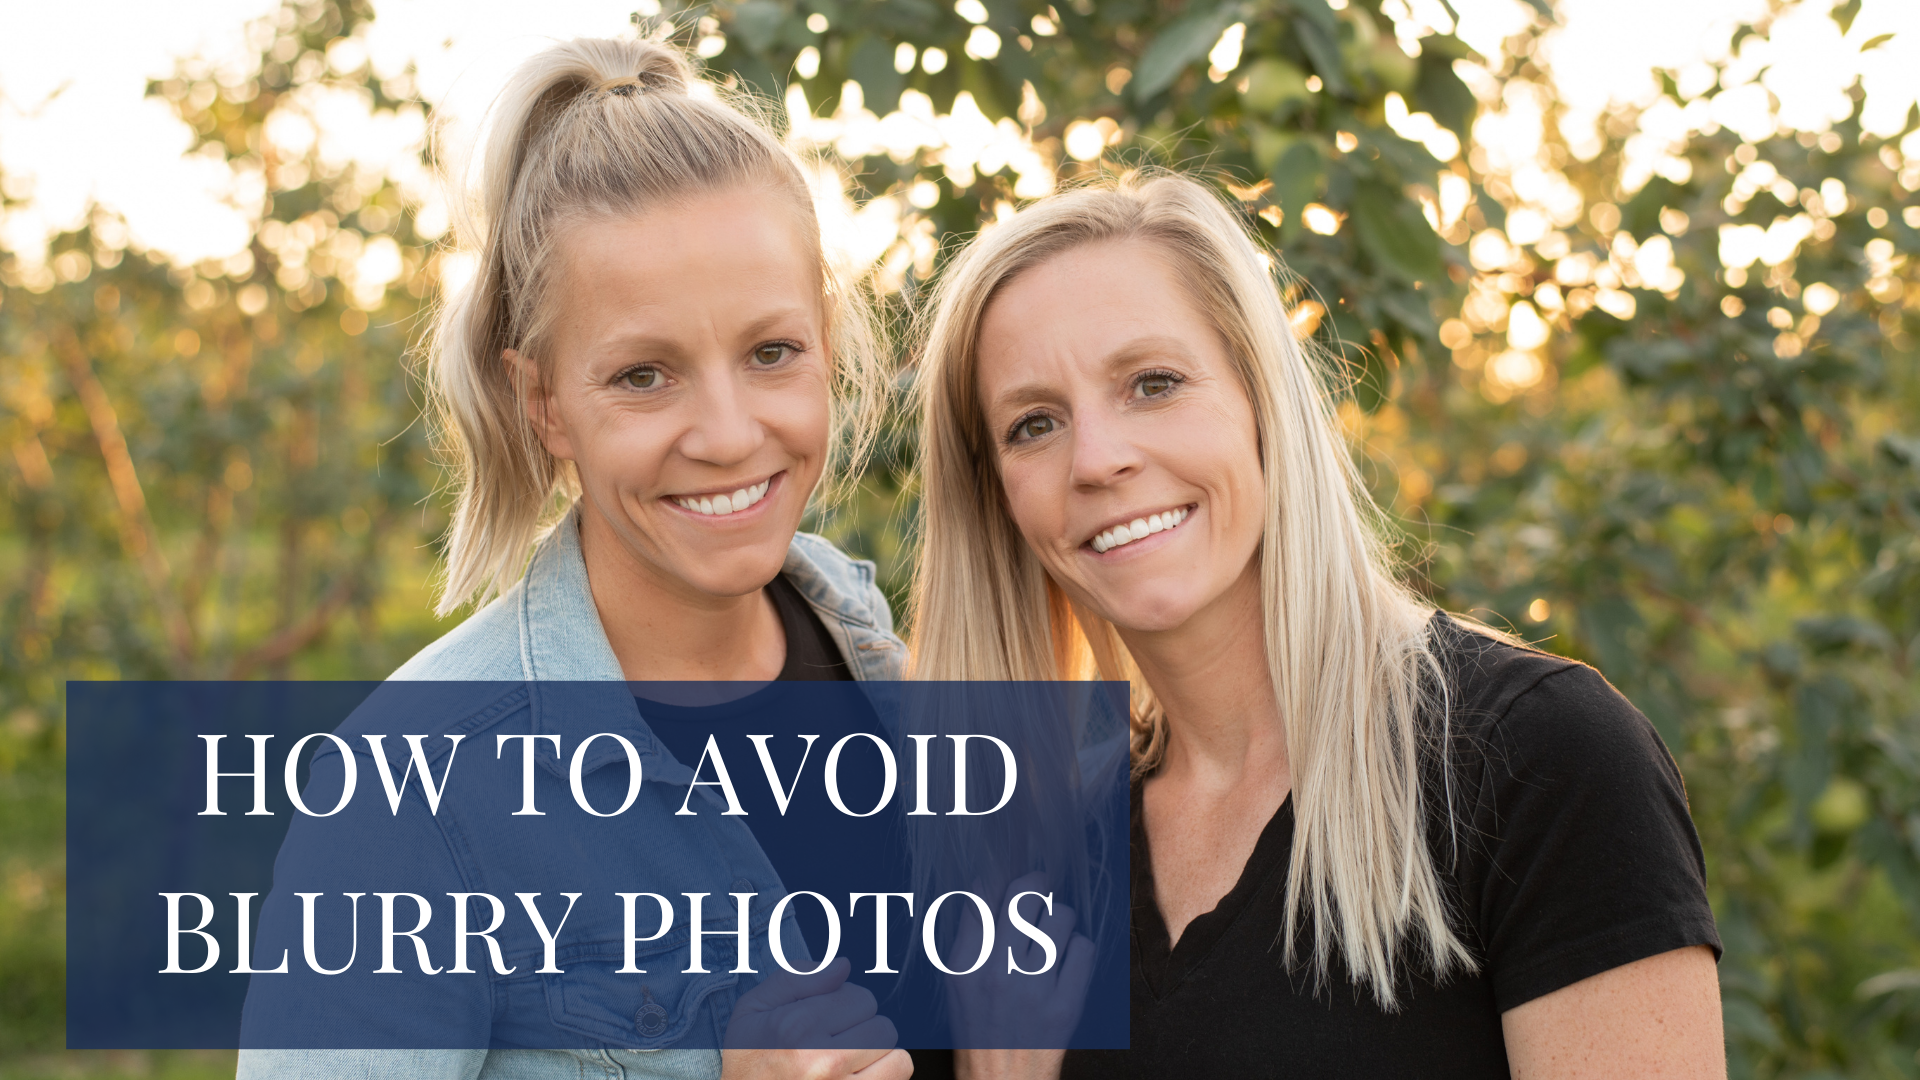 HOW TO AVOID BLURRY PHOTOS DSLR PHOTOGRAPHY TIPS